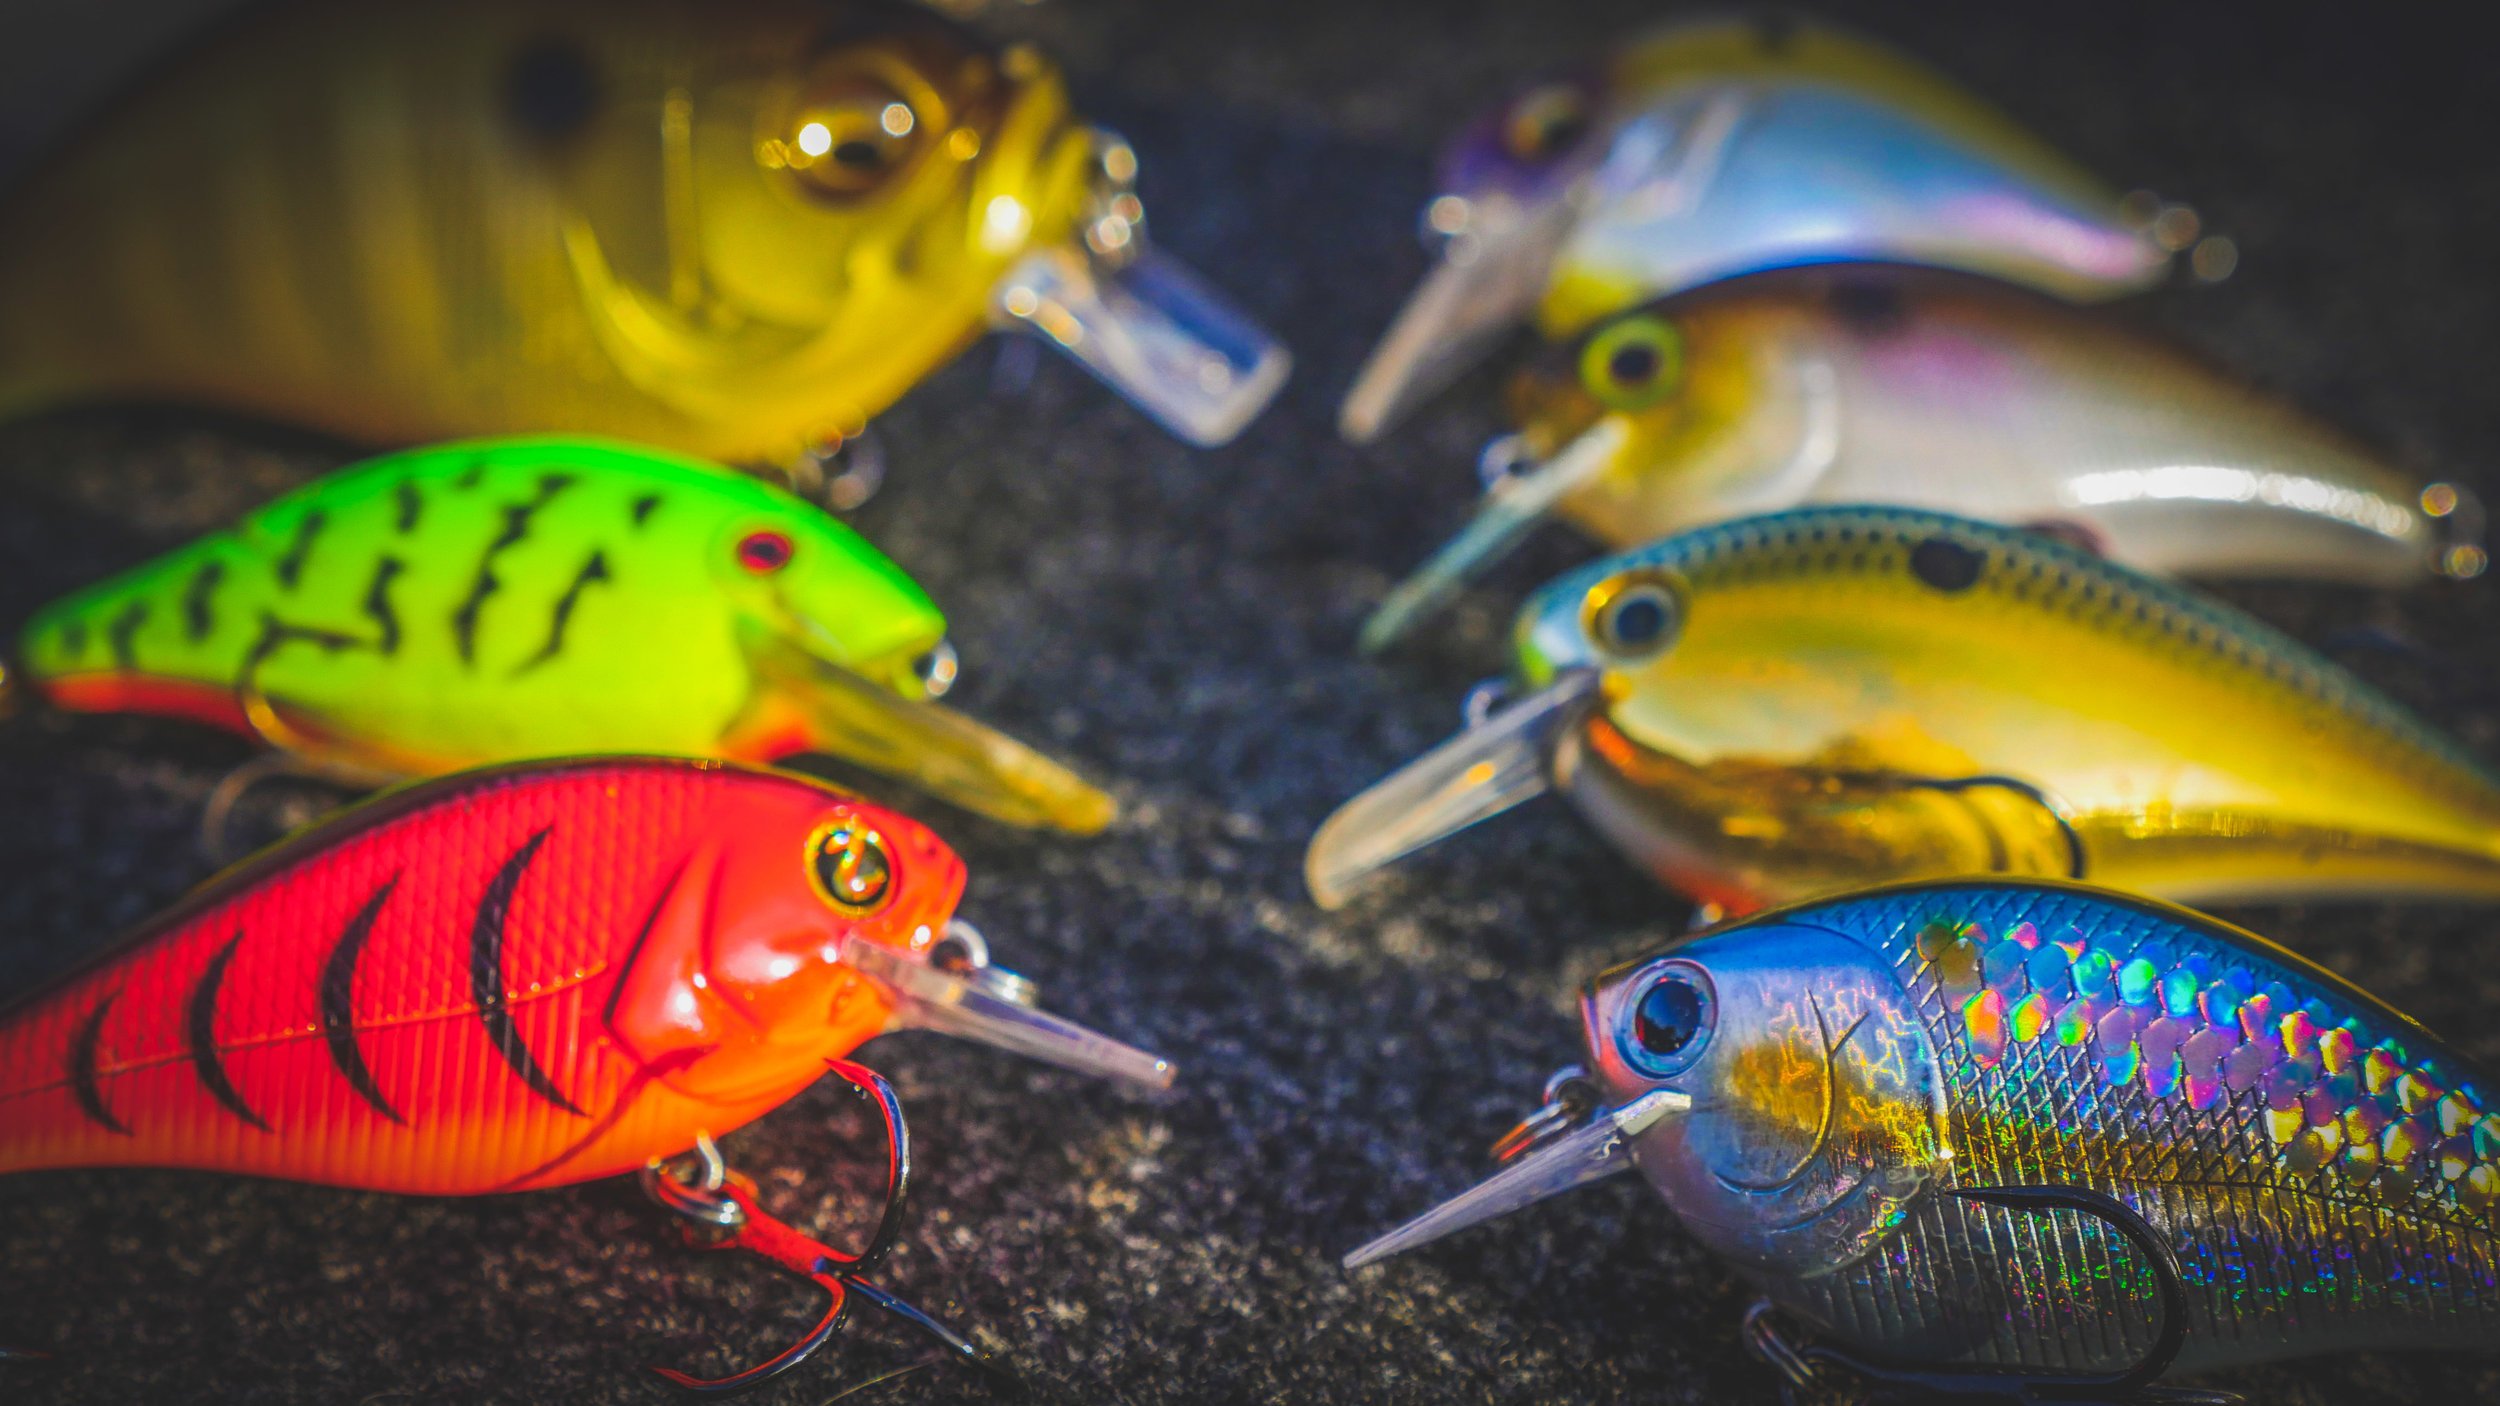 Squarebill Crankbait Buyer's Guide - Top Baits For Every Season